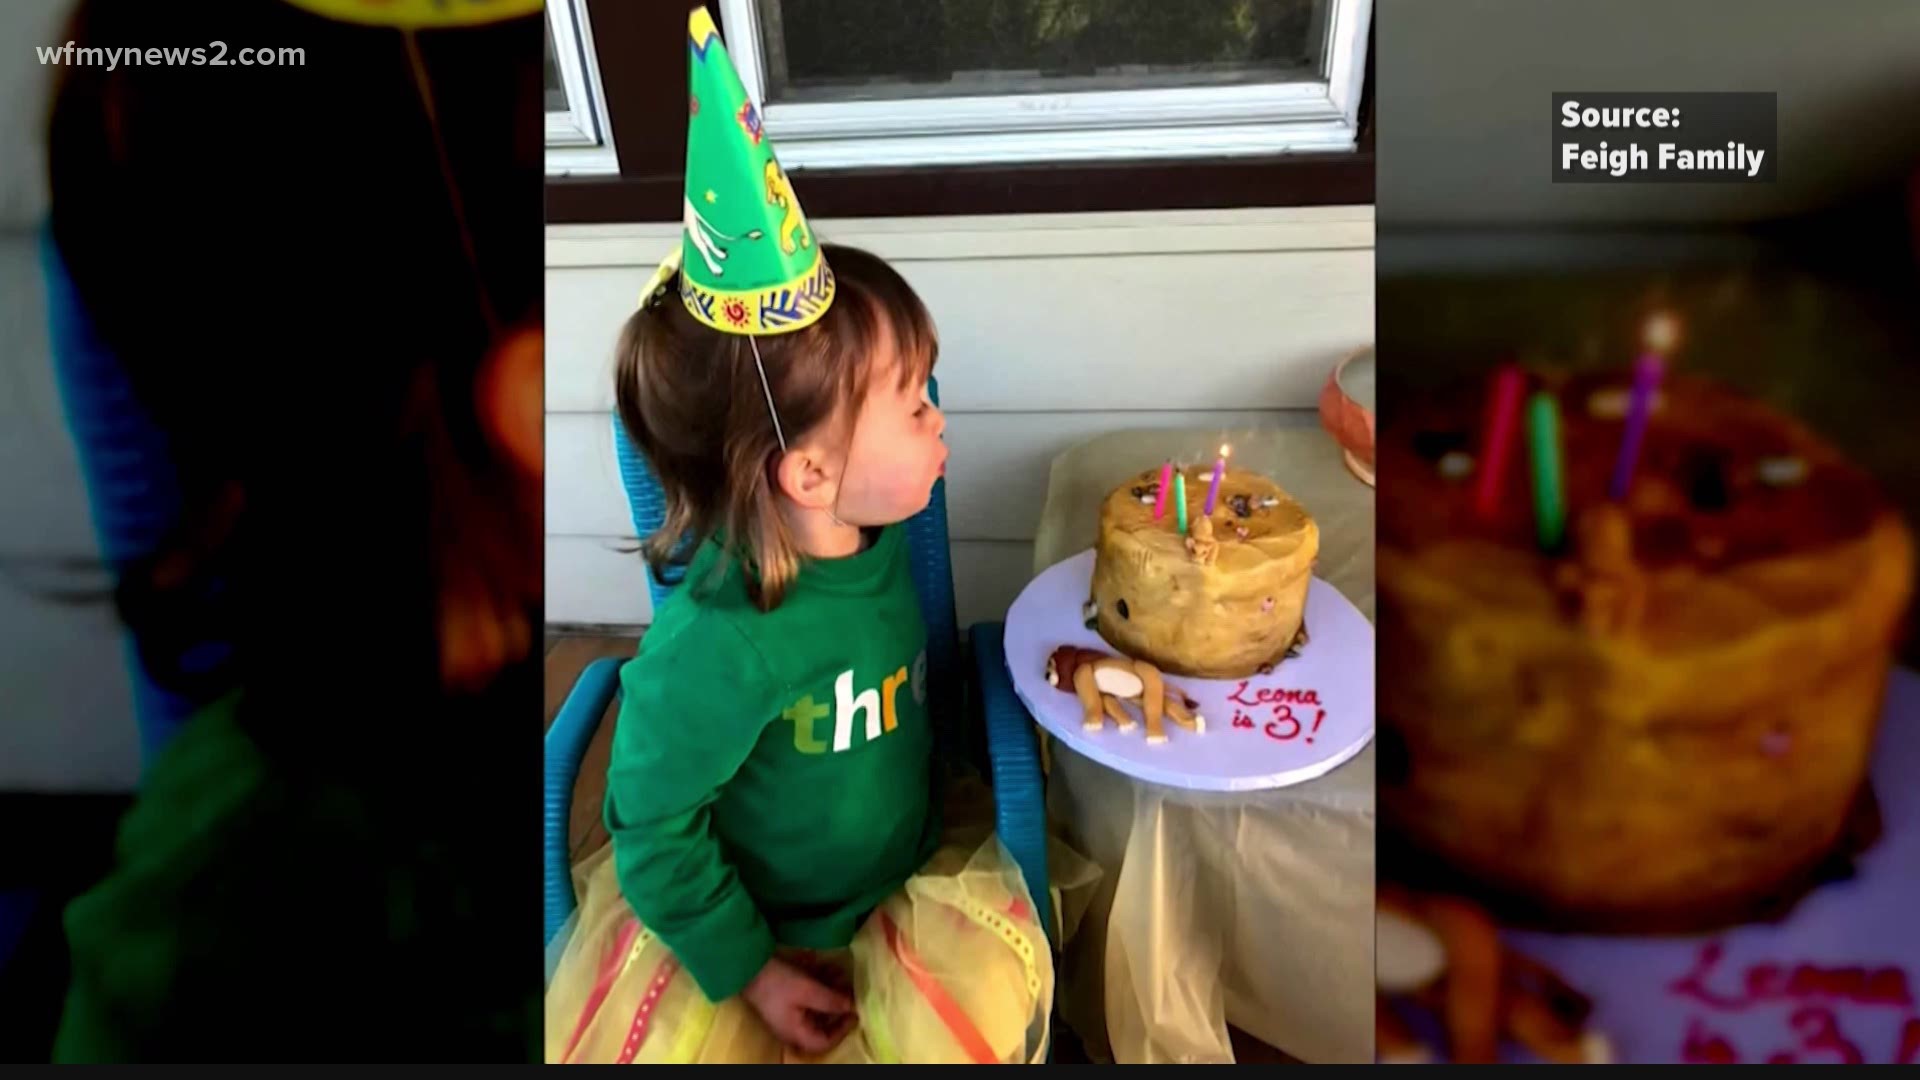 A birthday girl asks for a special cake for a very specific reason… so she can have it all to herself.